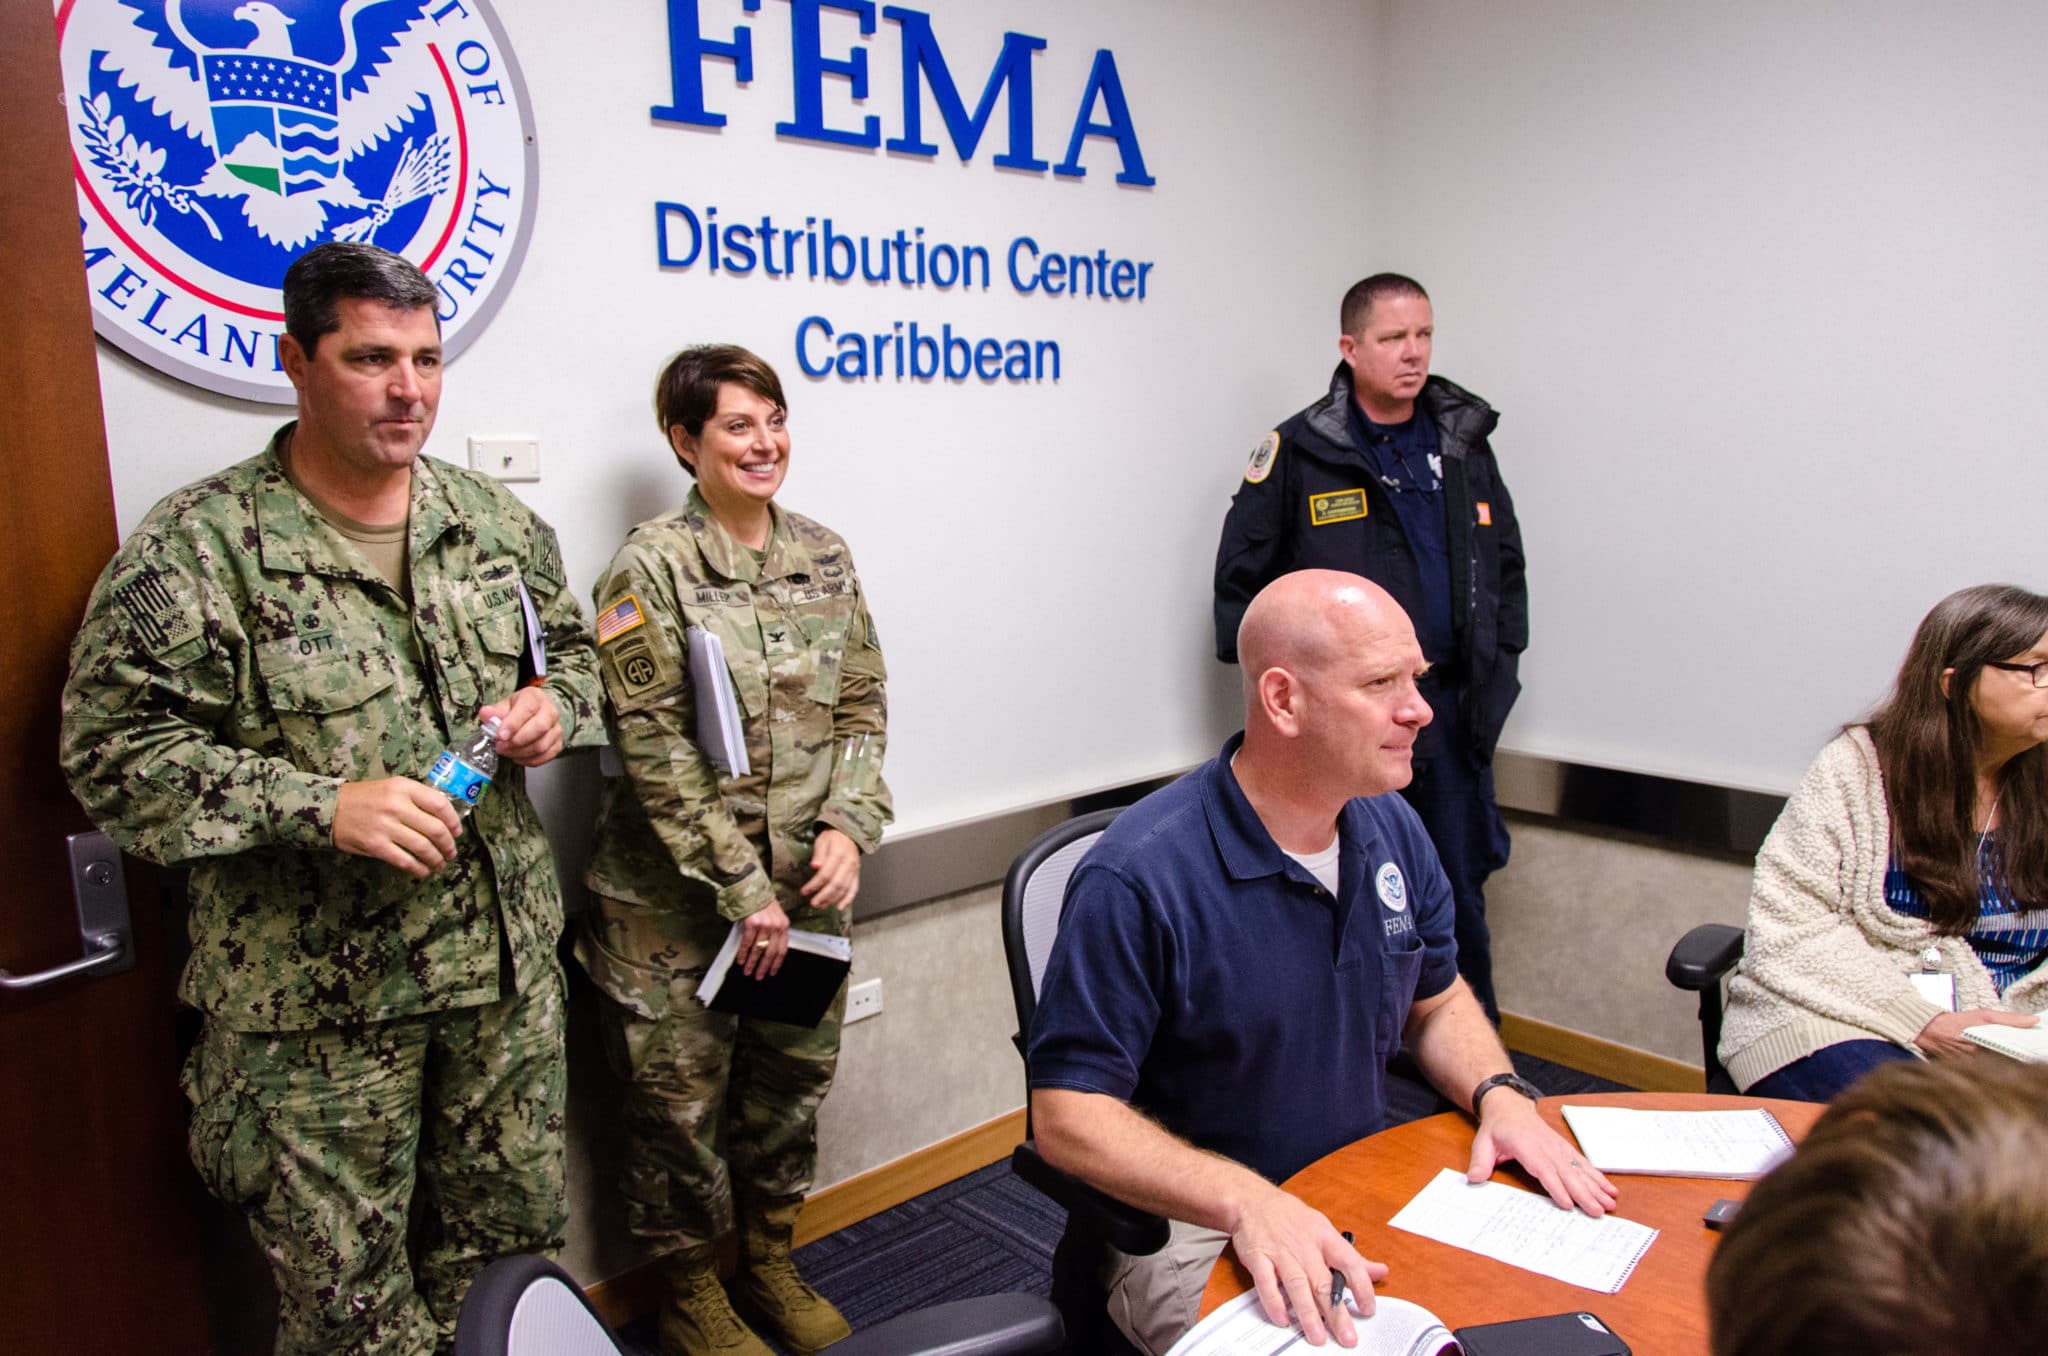 FEMA’s delay in Puerto Rico follows federal pattern of neglect